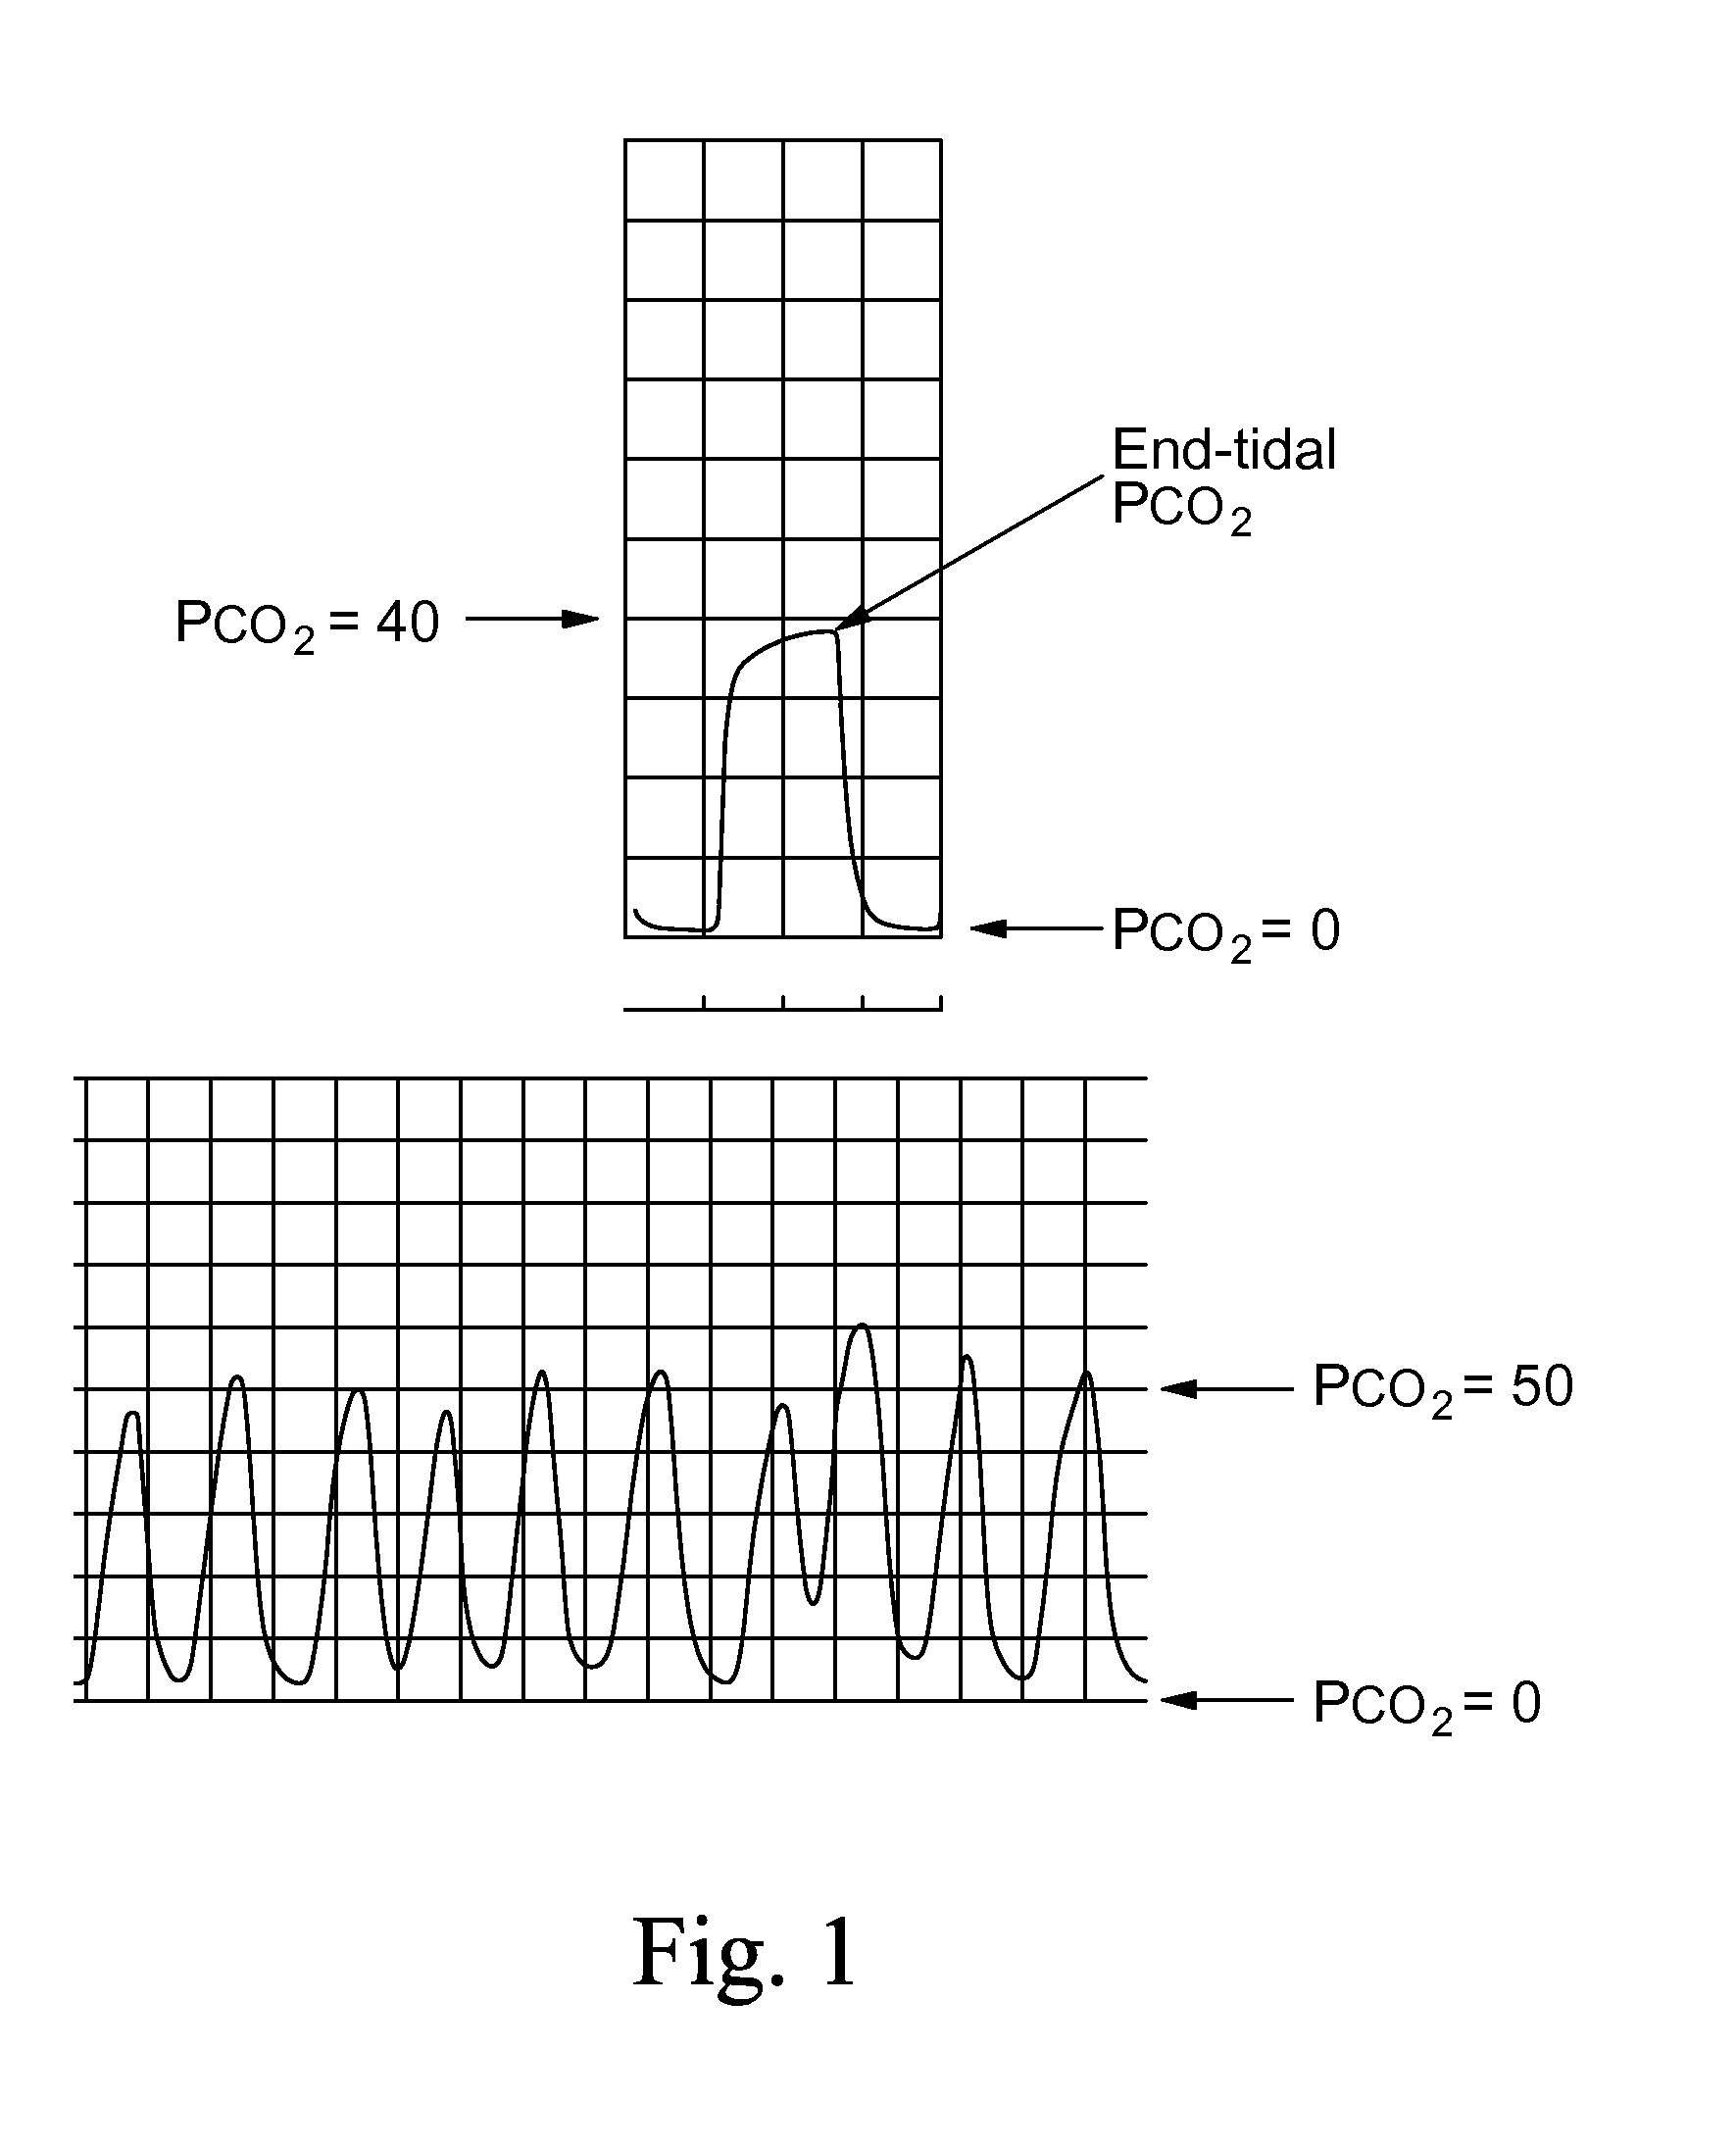 Marker Detection Method And Apparatus To Monitor Drug Compliance